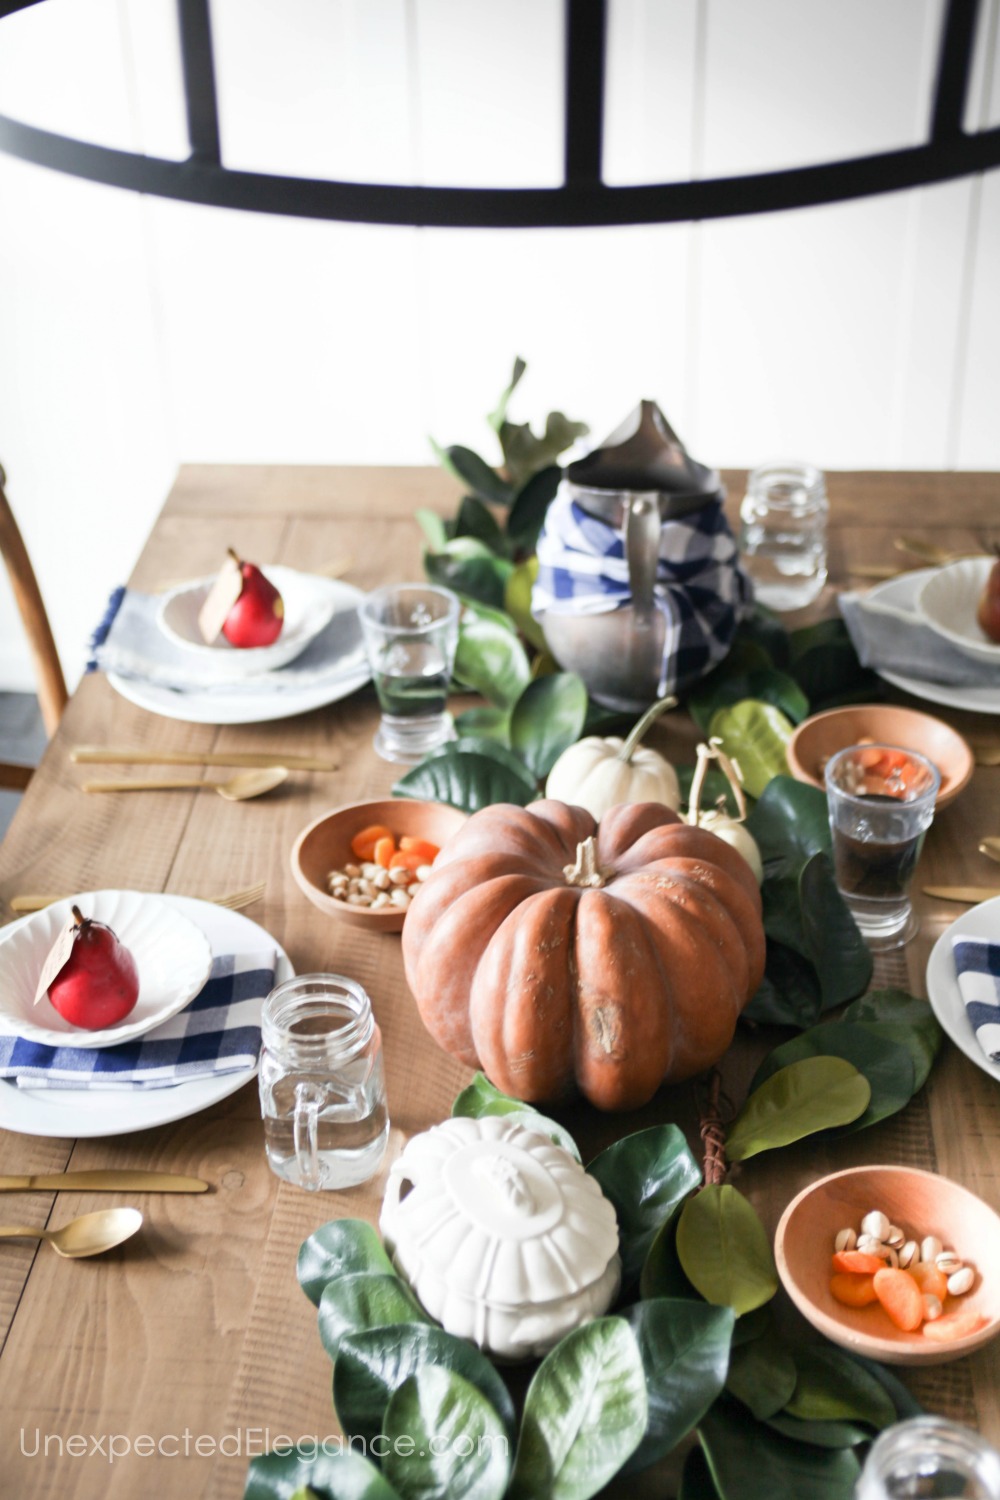 Don't waste too much time on your table this Thanksgiving. Check out this simple Thanksgiving table for some great ideas!